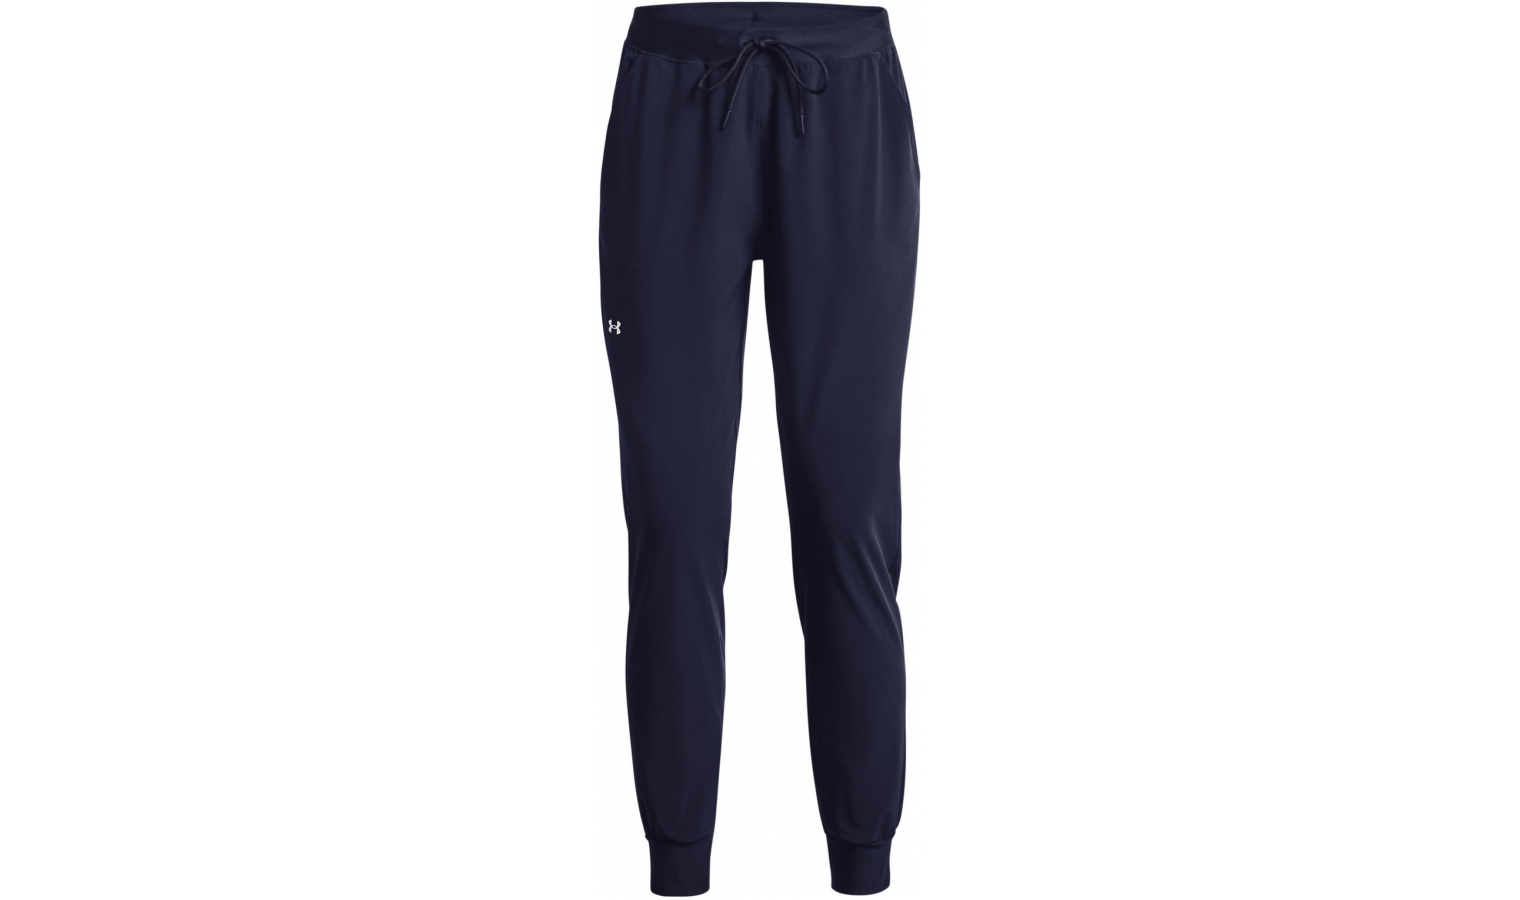  Under Armour Womens Motion Flare Pants, (001) Black